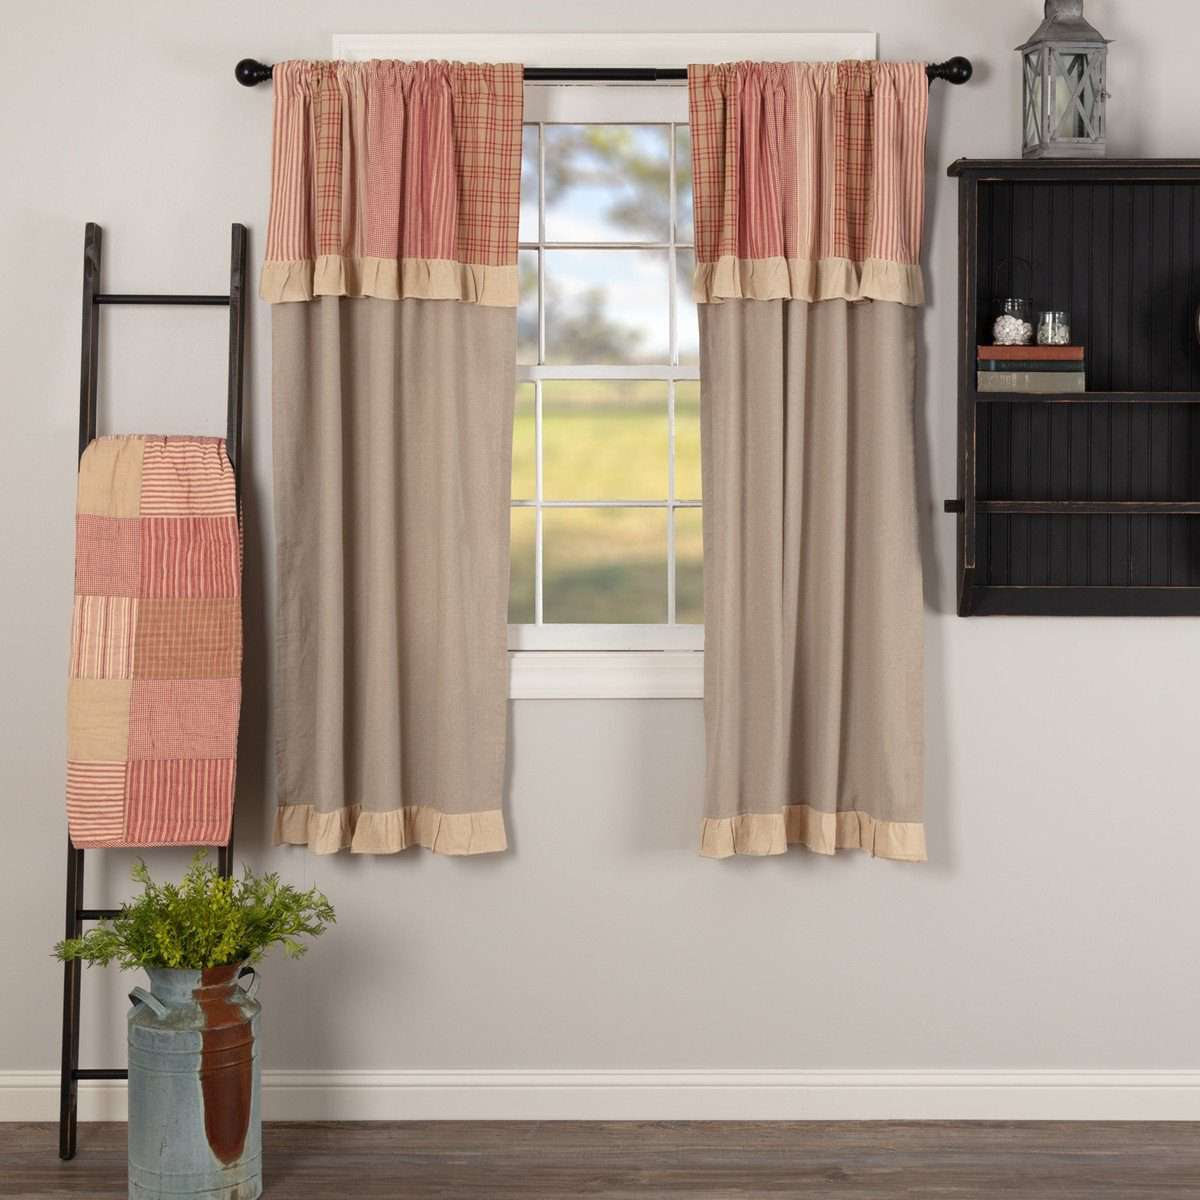 Sawyer Mill Red Short Panel Curtain with Attached Patchwork Valance Set of 2 36"x63" - The Fox Decor